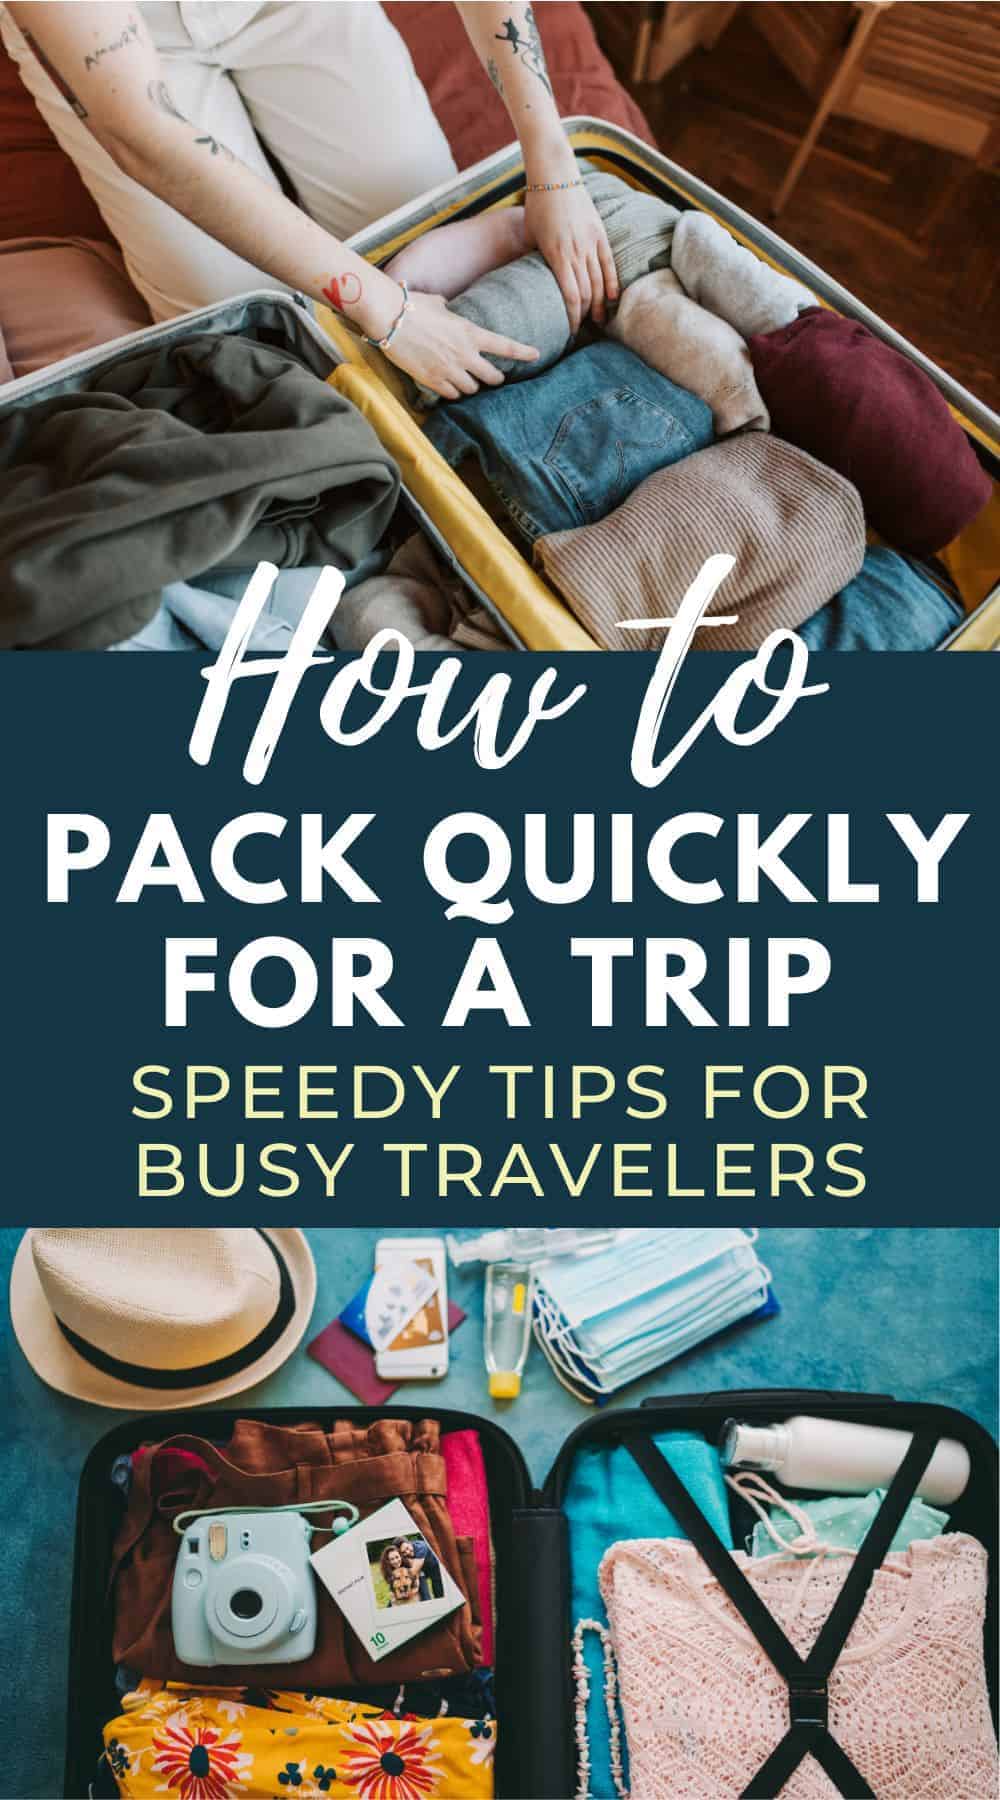 Pinterest image with two photos of open packed suitcases. The text overlay reads, "How to pack quickly for a trip. Speedy tips for busy travelers."